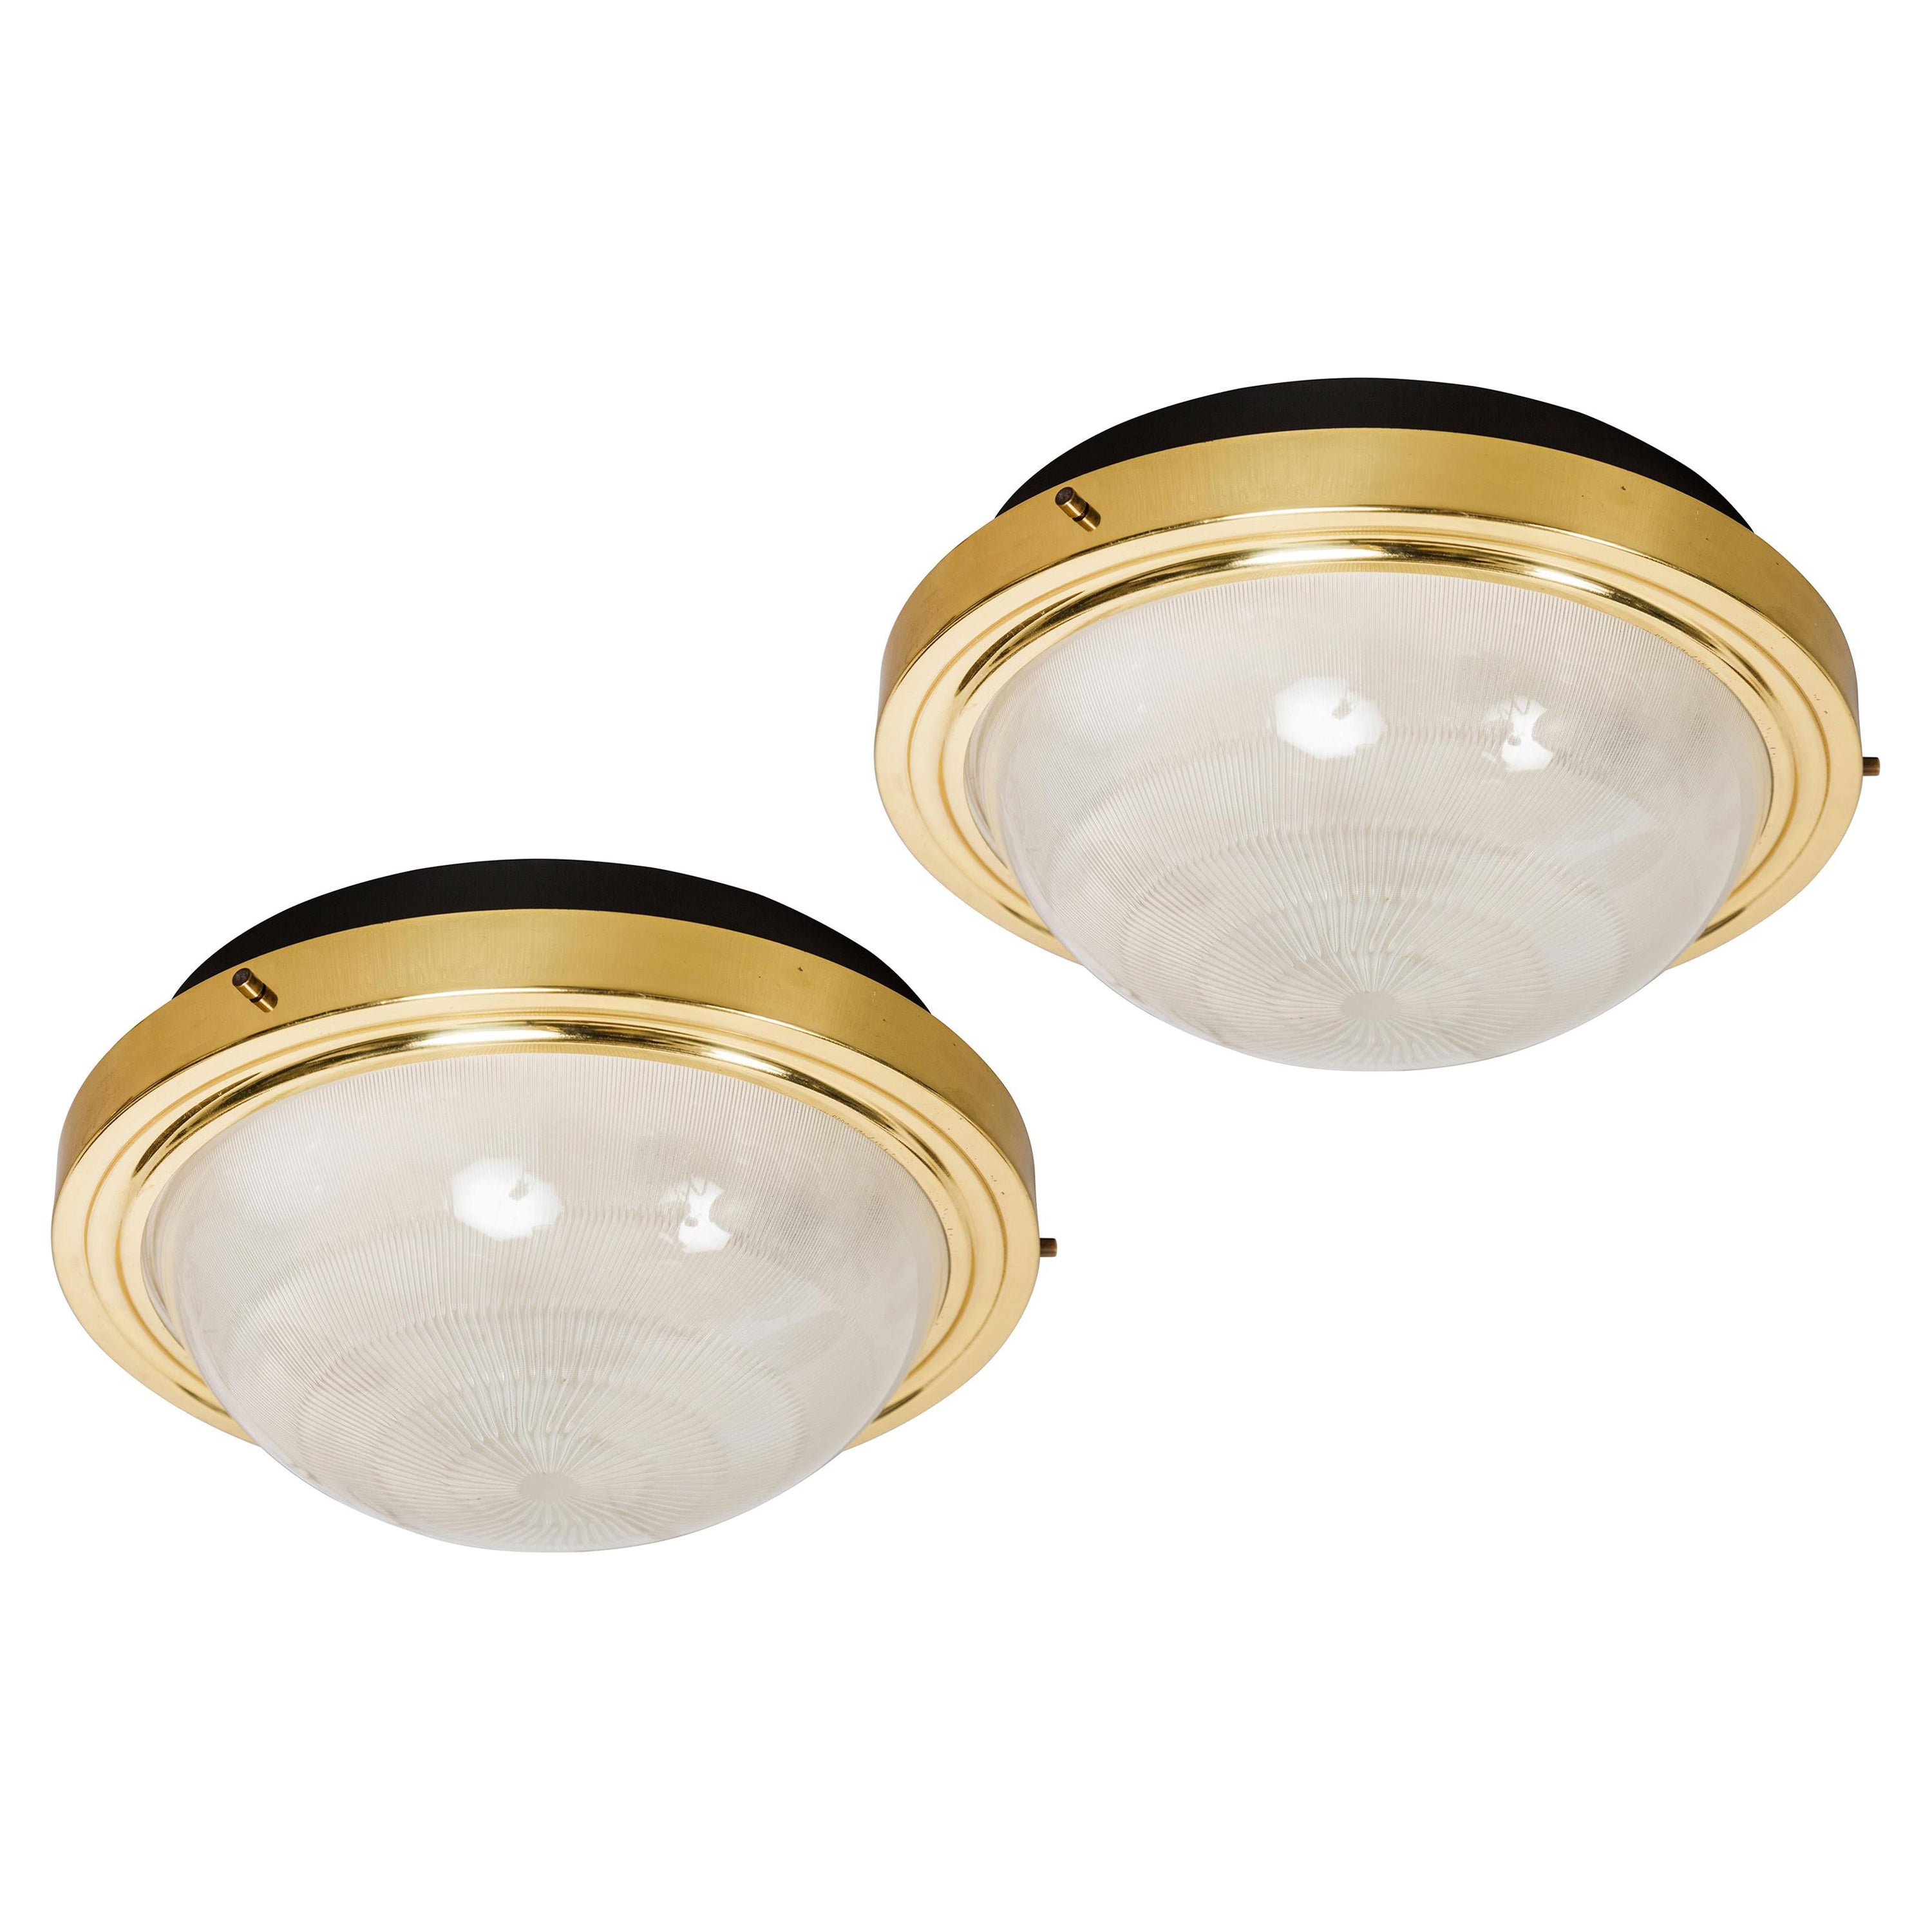 Pair of 1960s Sergio Mazza Brass and Glass Wall or Ceiling Lights for Artemide For Sale